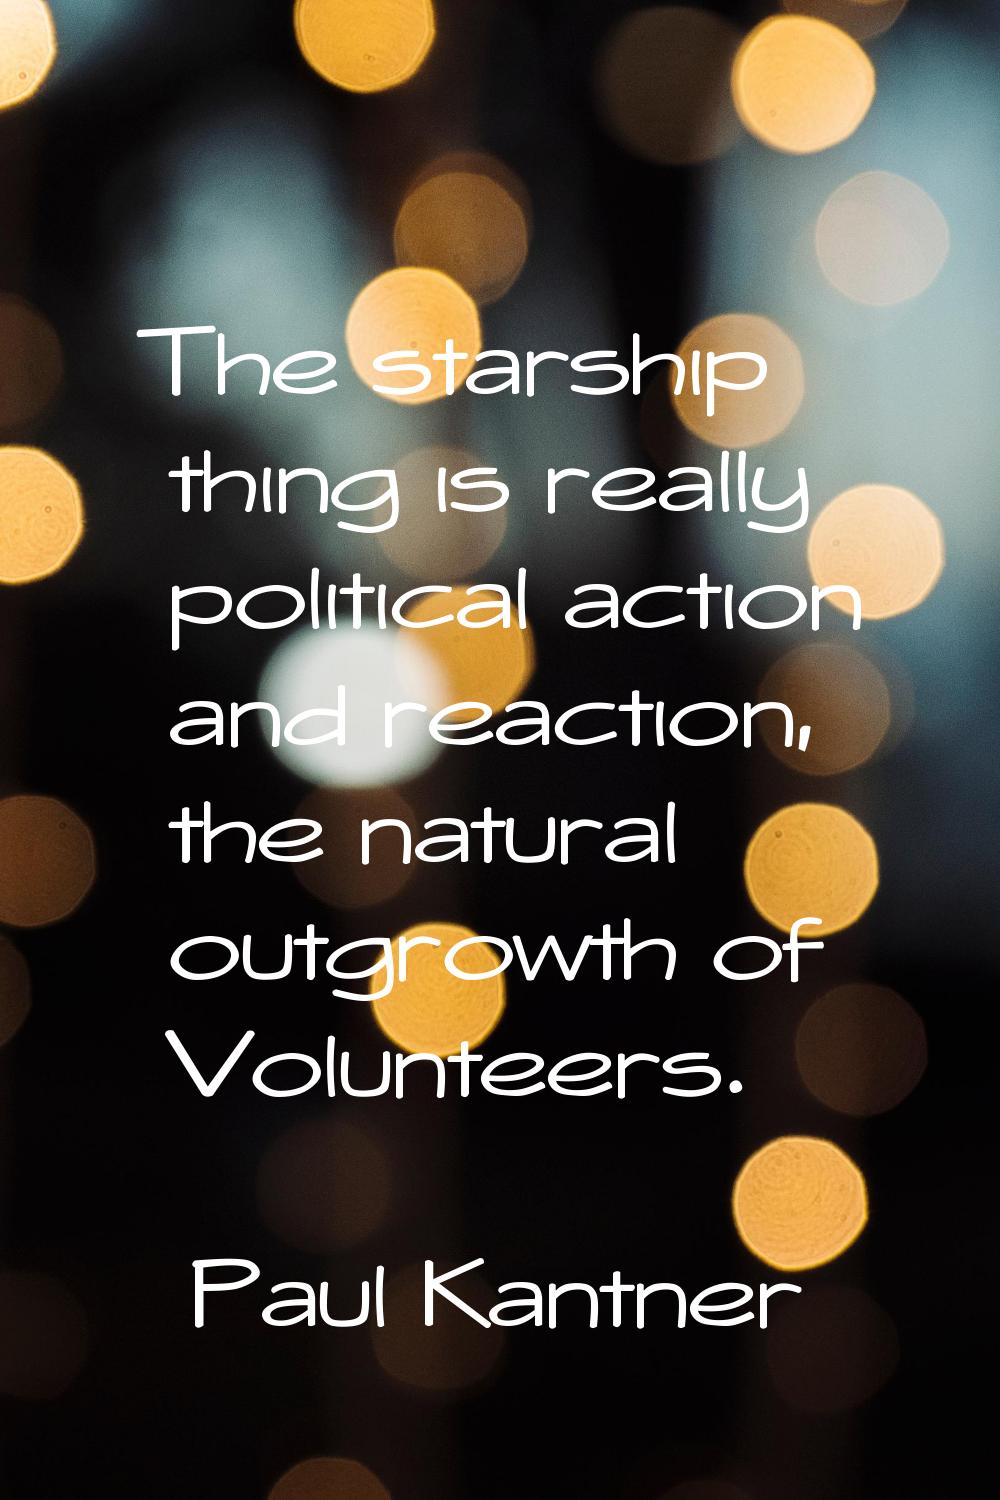 The starship thing is really political action and reaction, the natural outgrowth of Volunteers.